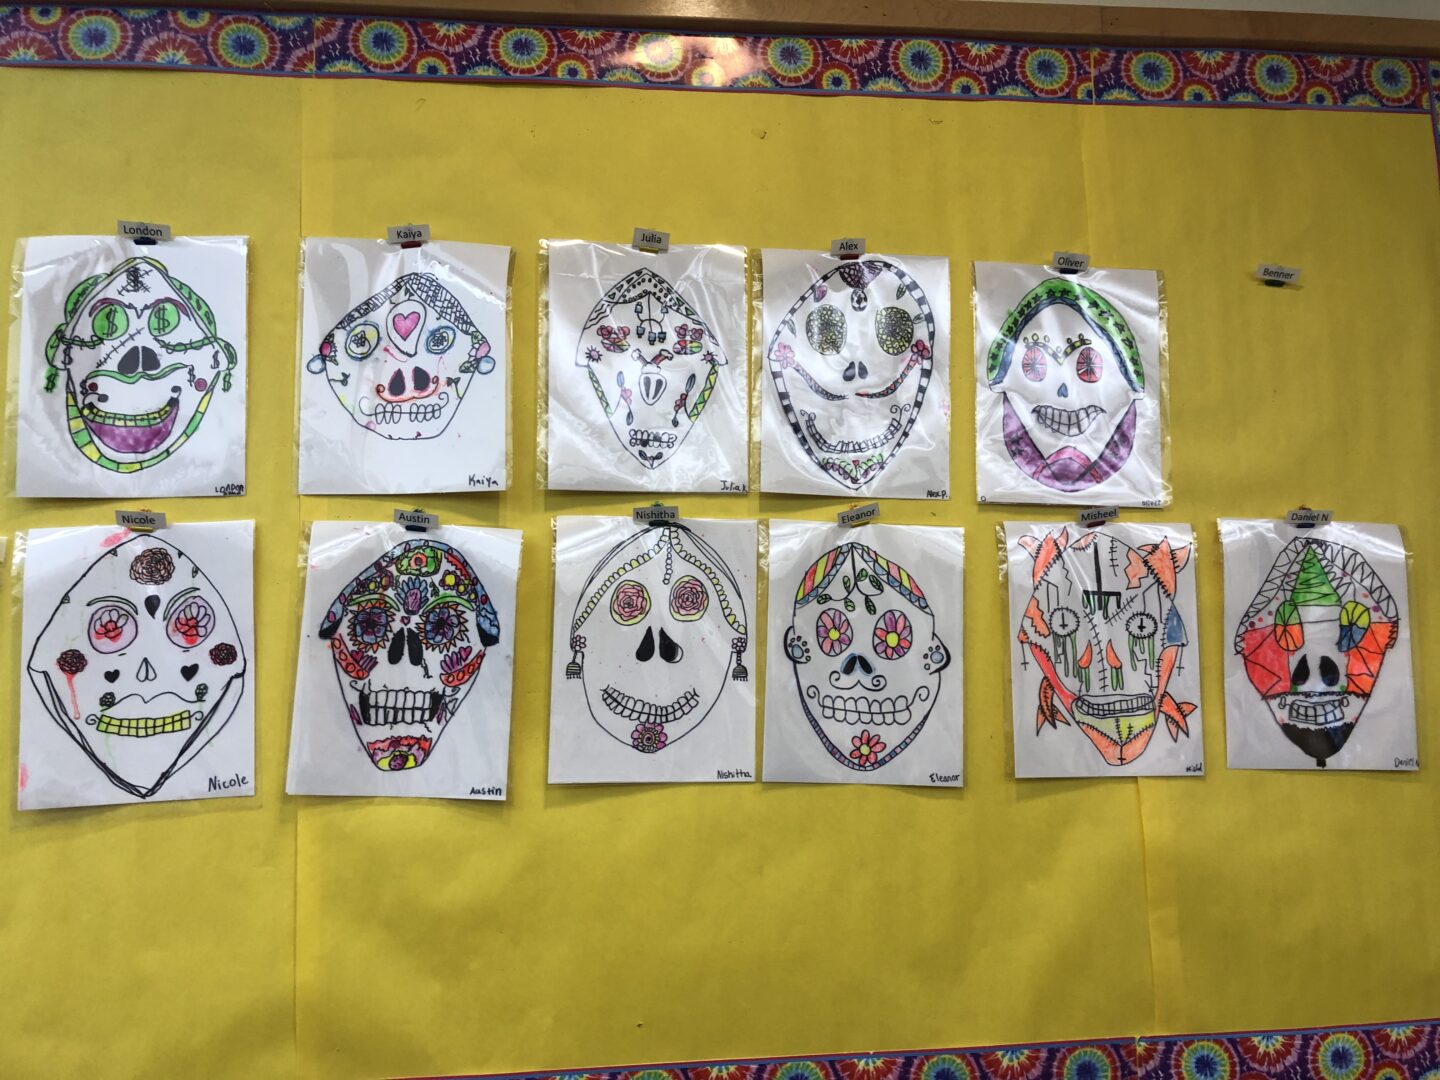 Frida Kahlo inspired Reserve Sugar Skulls created by students fro Grade 5.  Follow @How2playtoday for more exciting activites